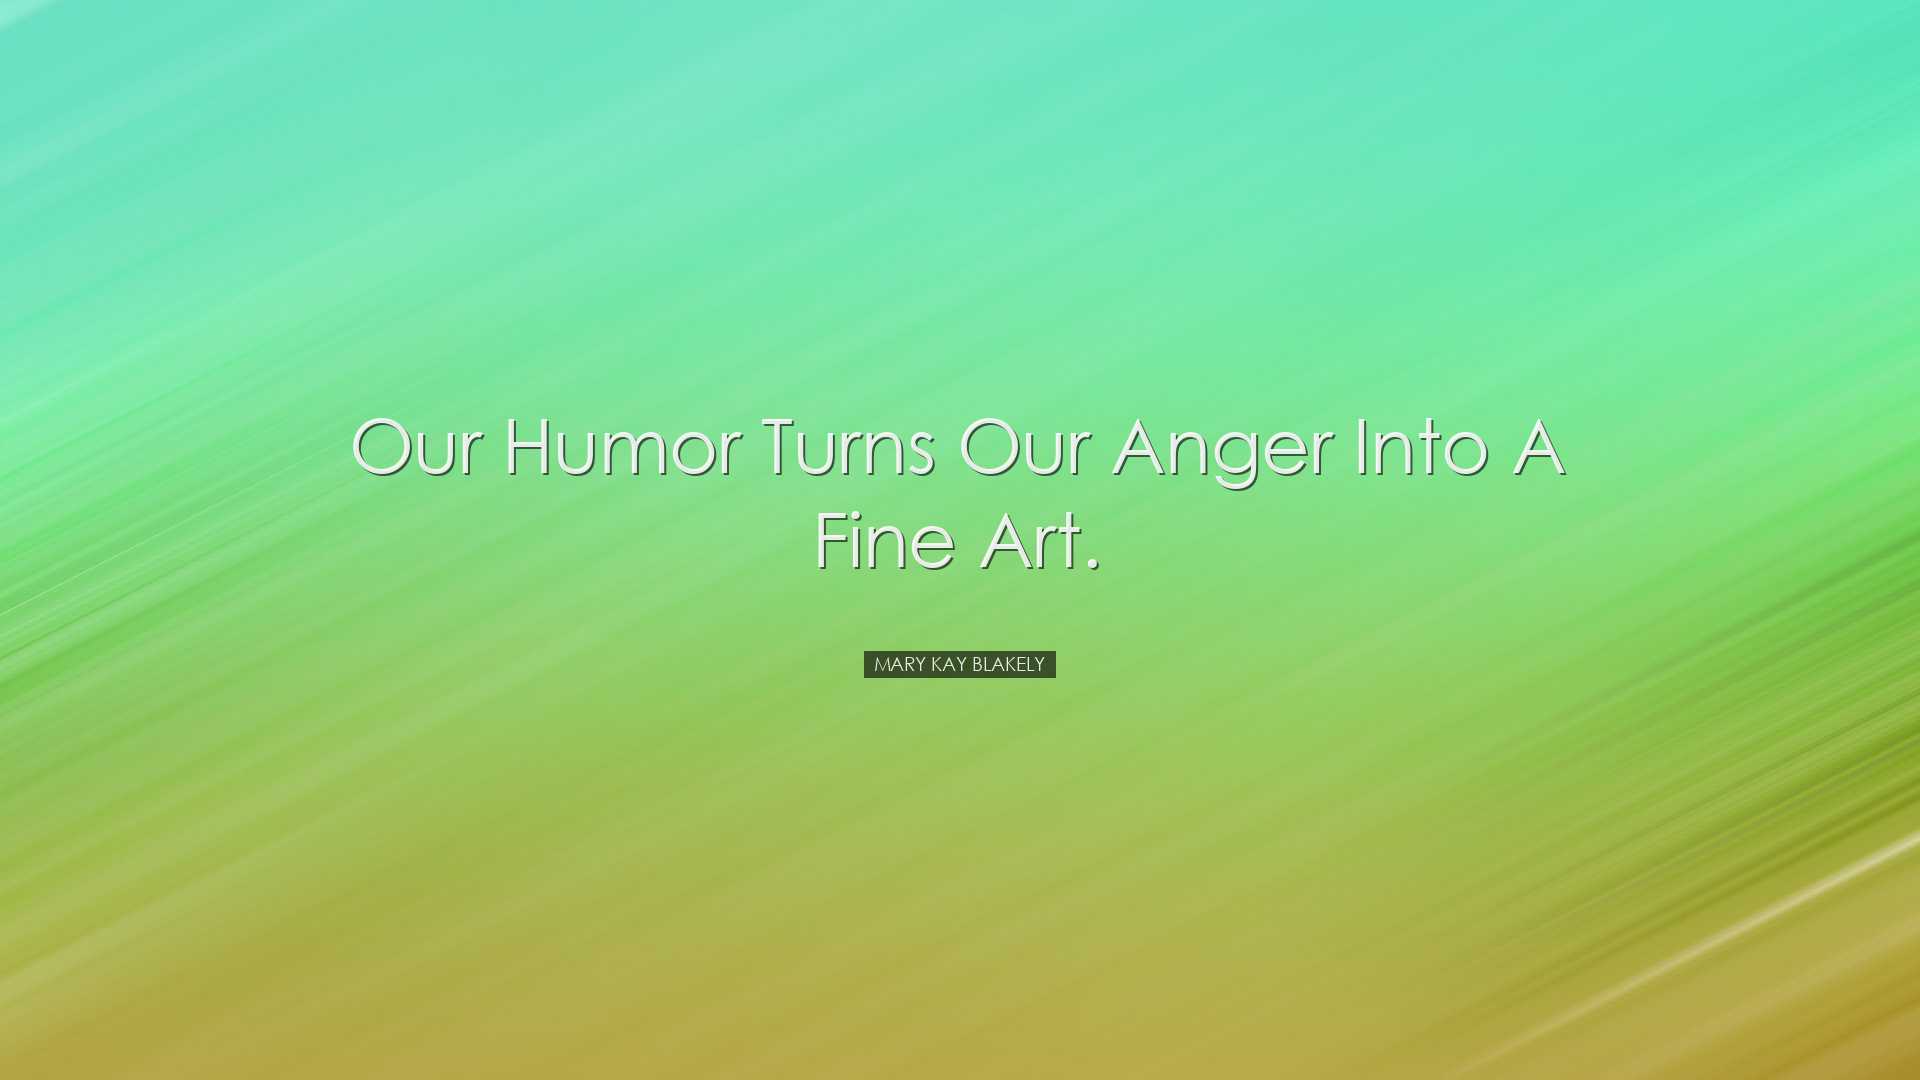 Our humor turns our anger into a fine art. - Mary Kay Blakely